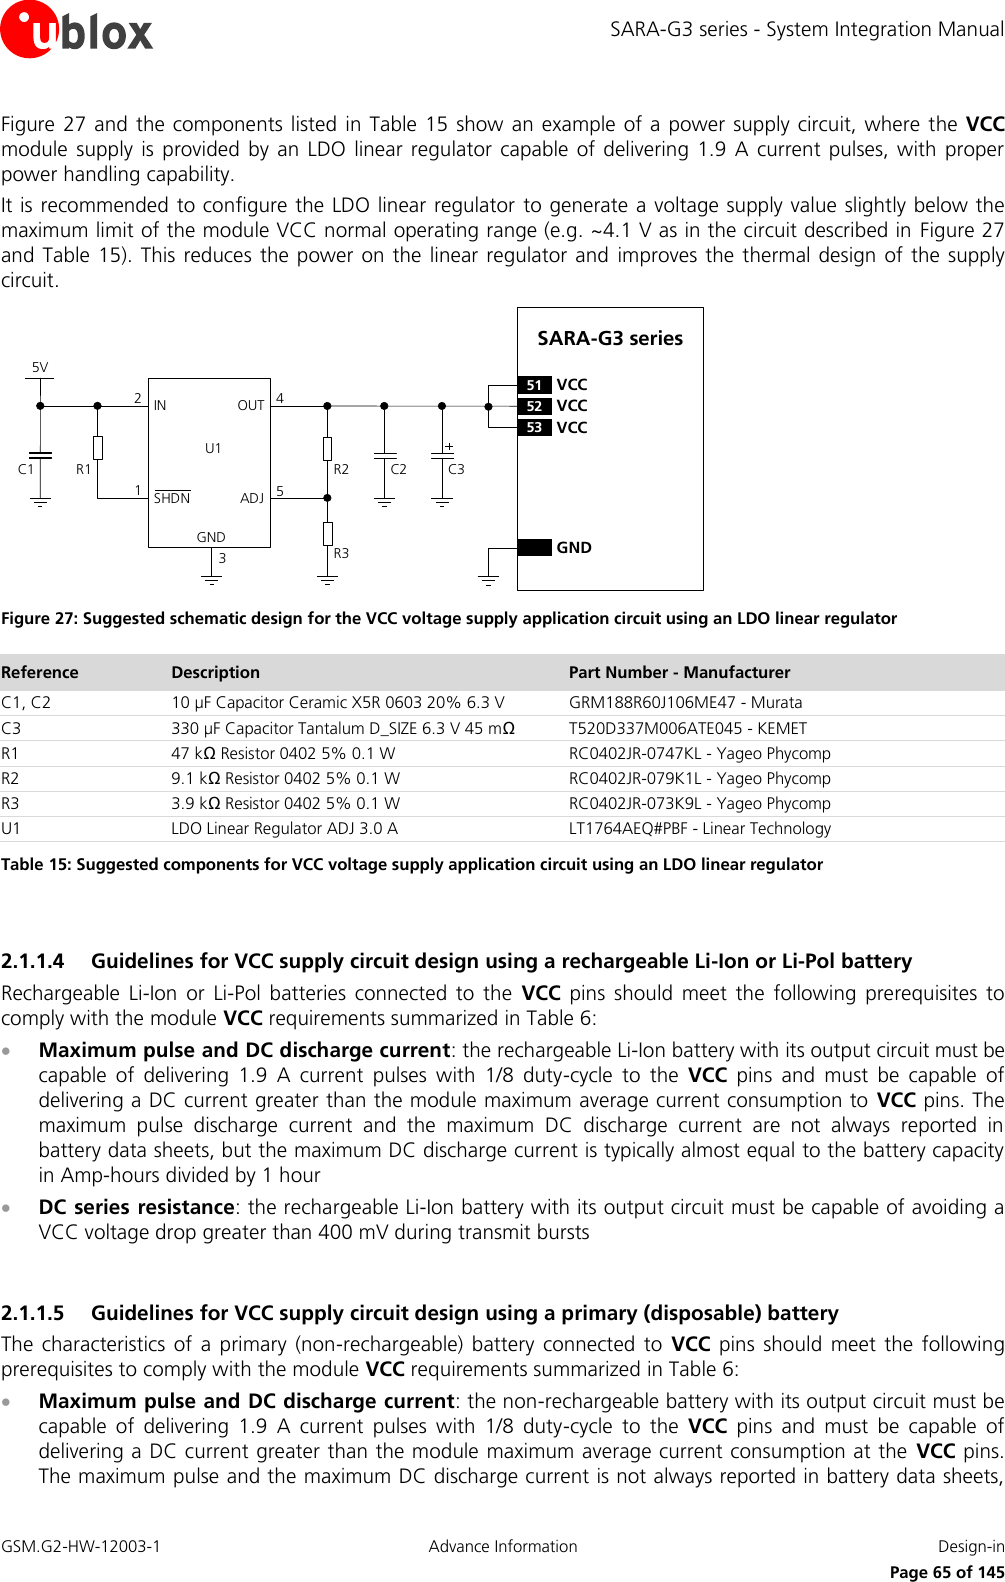 SARA-G3 series - System Integration Manual GSM.G2-HW-12003-1  Advance Information  Design-in     Page 65 of 145 Figure 27 and  the components listed  in Table 15  show an  example of a power  supply circuit, where  the VCC module  supply  is  provided  by  an  LDO  linear  regulator  capable  of  delivering  1.9  A  current  pulses, with  proper power handling capability. It is recommended to configure the LDO linear regulator  to generate a voltage supply value slightly below the maximum limit of the module VCC normal operating range (e.g. ~4.1 V as in the circuit described in  Figure 27 and Table  15). This reduces the  power on the  linear regulator  and  improves  the thermal design of  the supply circuit. 5VC1 R1IN OUTADJGND12453C2R2R3U1SHDNSARA-G3 series52 VCC53 VCC51 VCCGNDC3 Figure 27: Suggested schematic design for the VCC voltage supply application circuit using an LDO linear regulator Reference Description Part Number - Manufacturer C1, C2 10 µF Capacitor Ceramic X5R 0603 20% 6.3 V GRM188R60J106ME47 - Murata C3 330 µF Capacitor Tantalum D_SIZE 6.3 V 45 mΩ T520D337M006ATE045 - KEMET R1 47 kΩ Resistor 0402 5% 0.1 W RC0402JR-0747KL - Yageo Phycomp R2 9.1 kΩ Resistor 0402 5% 0.1 W RC0402JR-079K1L - Yageo Phycomp R3 3.9 kΩ Resistor 0402 5% 0.1 W RC0402JR-073K9L - Yageo Phycomp U1 LDO Linear Regulator ADJ 3.0 A LT1764AEQ#PBF - Linear Technology Table 15: Suggested components for VCC voltage supply application circuit using an LDO linear regulator  2.1.1.4 Guidelines for VCC supply circuit design using a rechargeable Li-Ion or Li-Pol battery Rechargeable  Li-Ion  or  Li-Pol  batteries  connected  to  the  VCC  pins  should  meet  the  following  prerequisites  to comply with the module VCC requirements summarized in Table 6:  Maximum pulse and DC discharge current: the rechargeable Li-Ion battery with its output circuit must be capable  of  delivering  1.9  A  current  pulses  with  1/8  duty-cycle  to  the  VCC  pins  and  must  be  capable  of delivering a DC current greater than the module maximum average current consumption to  VCC pins. The maximum  pulse  discharge  current  and  the  maximum  DC  discharge  current  are  not  always  reported  in battery data sheets, but the maximum DC discharge current is typically almost equal to the battery capacity in Amp-hours divided by 1 hour  DC series resistance: the rechargeable Li-Ion battery with its output circuit must be capable of avoiding a VCC voltage drop greater than 400 mV during transmit bursts  2.1.1.5 Guidelines for VCC supply circuit design using a primary (disposable) battery The  characteristics  of  a  primary  (non-rechargeable)  battery  connected  to  VCC  pins  should  meet  the  following prerequisites to comply with the module VCC requirements summarized in Table 6:  Maximum pulse and DC discharge current: the non-rechargeable battery with its output circuit must be capable  of  delivering  1.9  A  current  pulses  with  1/8  duty-cycle  to  the  VCC  pins  and  must  be  capable  of delivering a DC current greater than the module maximum average current consumption at the  VCC pins. The maximum pulse and the maximum DC discharge current is not always reported in battery data sheets, 